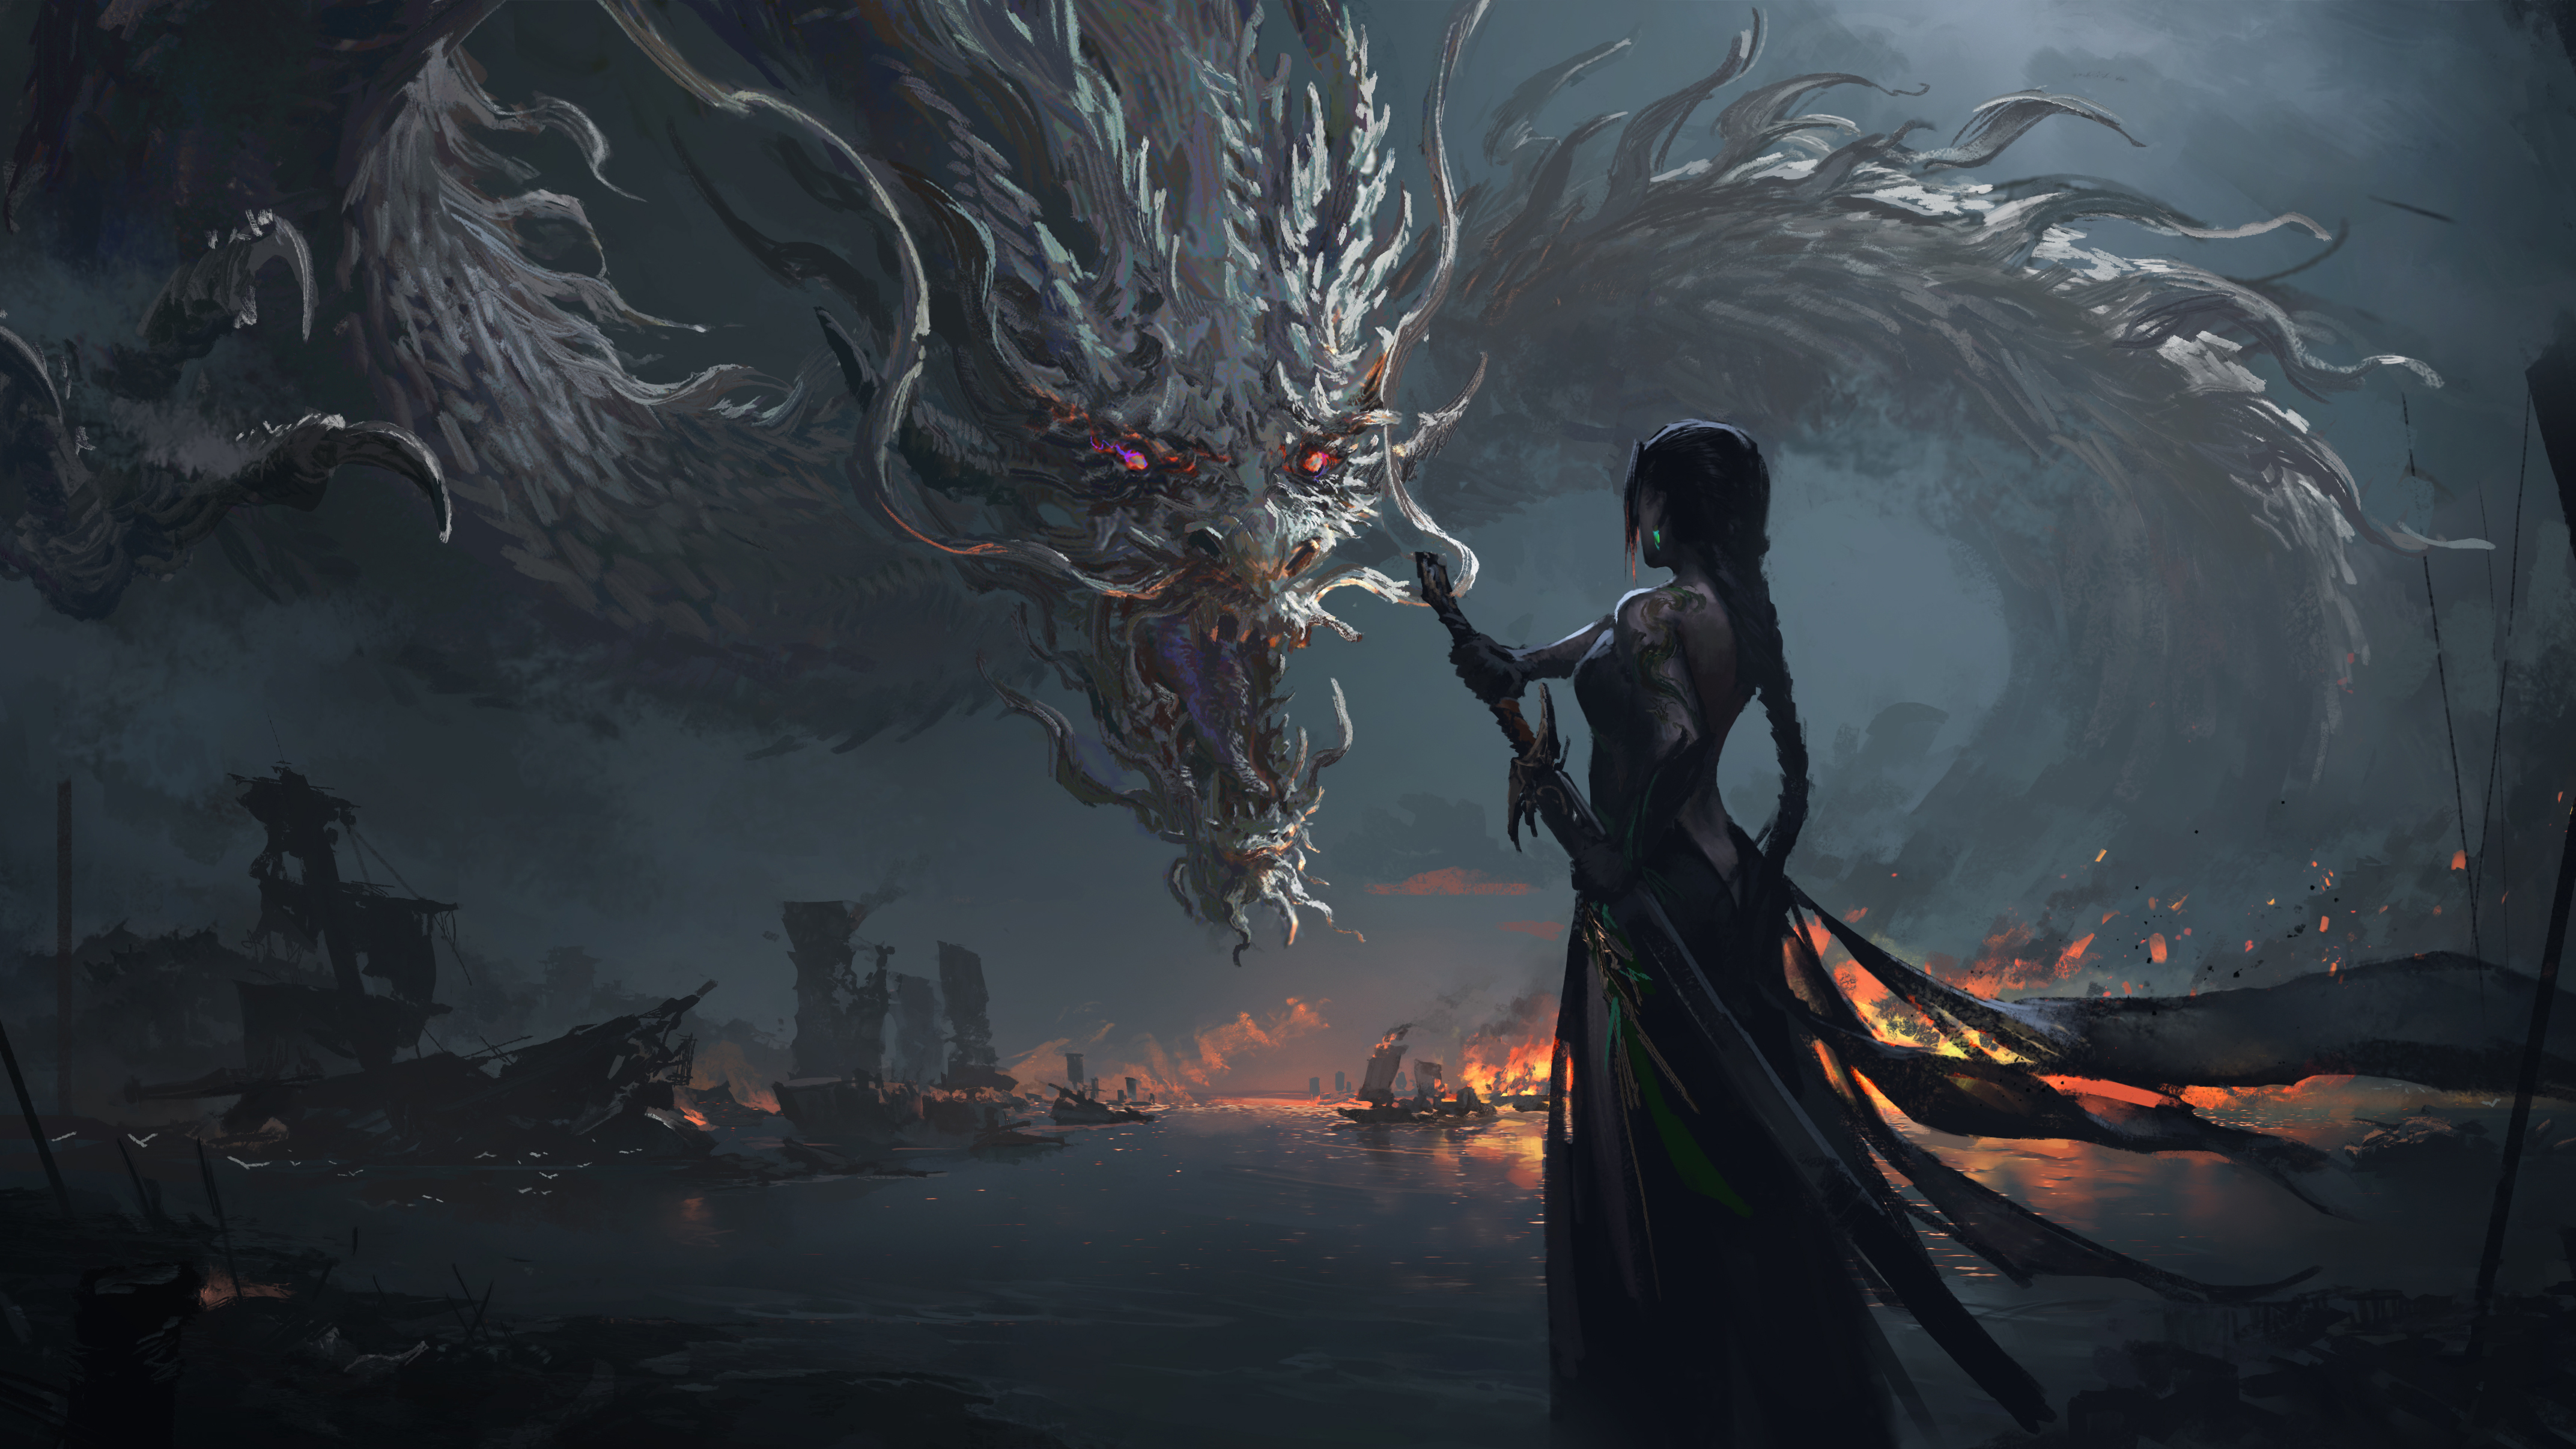 Anime 4288x2412 LEO (Artist) rear view dragon original characters weapon fire boat ponytail long hair back tattoo sword braids water dress Chinese dragon